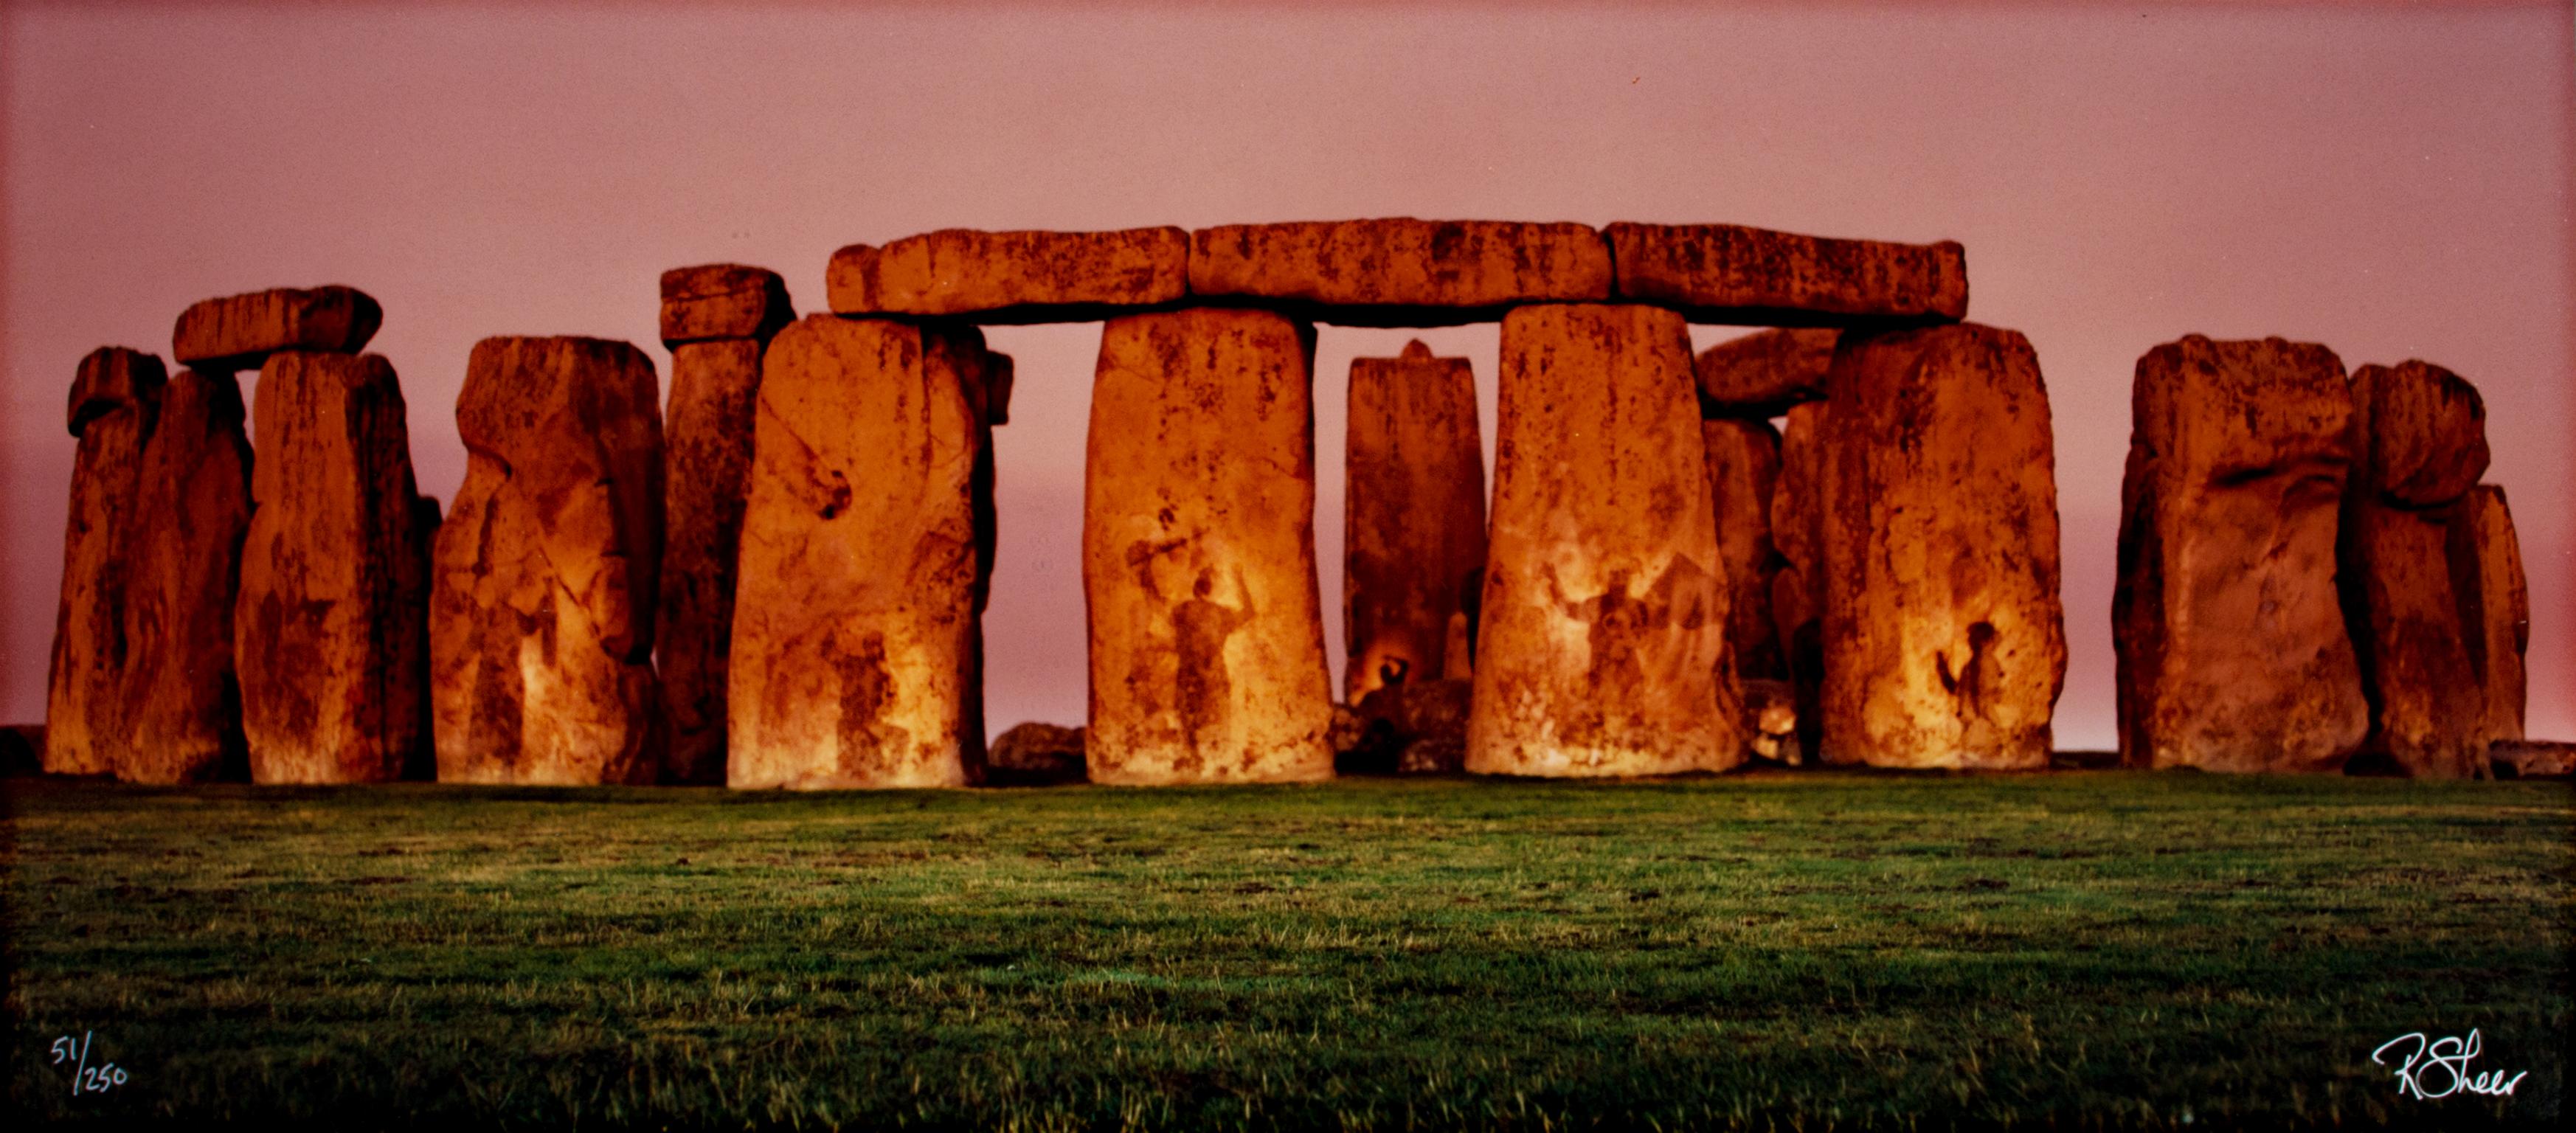 "The Spirits of Stonehenge" is an original fine-art photograph by Robert Kawika Sheer. The image is signed in the lower right and editioned in the lower left. Edition 51/250. The image depicts Stonehenge against a pink sky. The megaliths are cast in